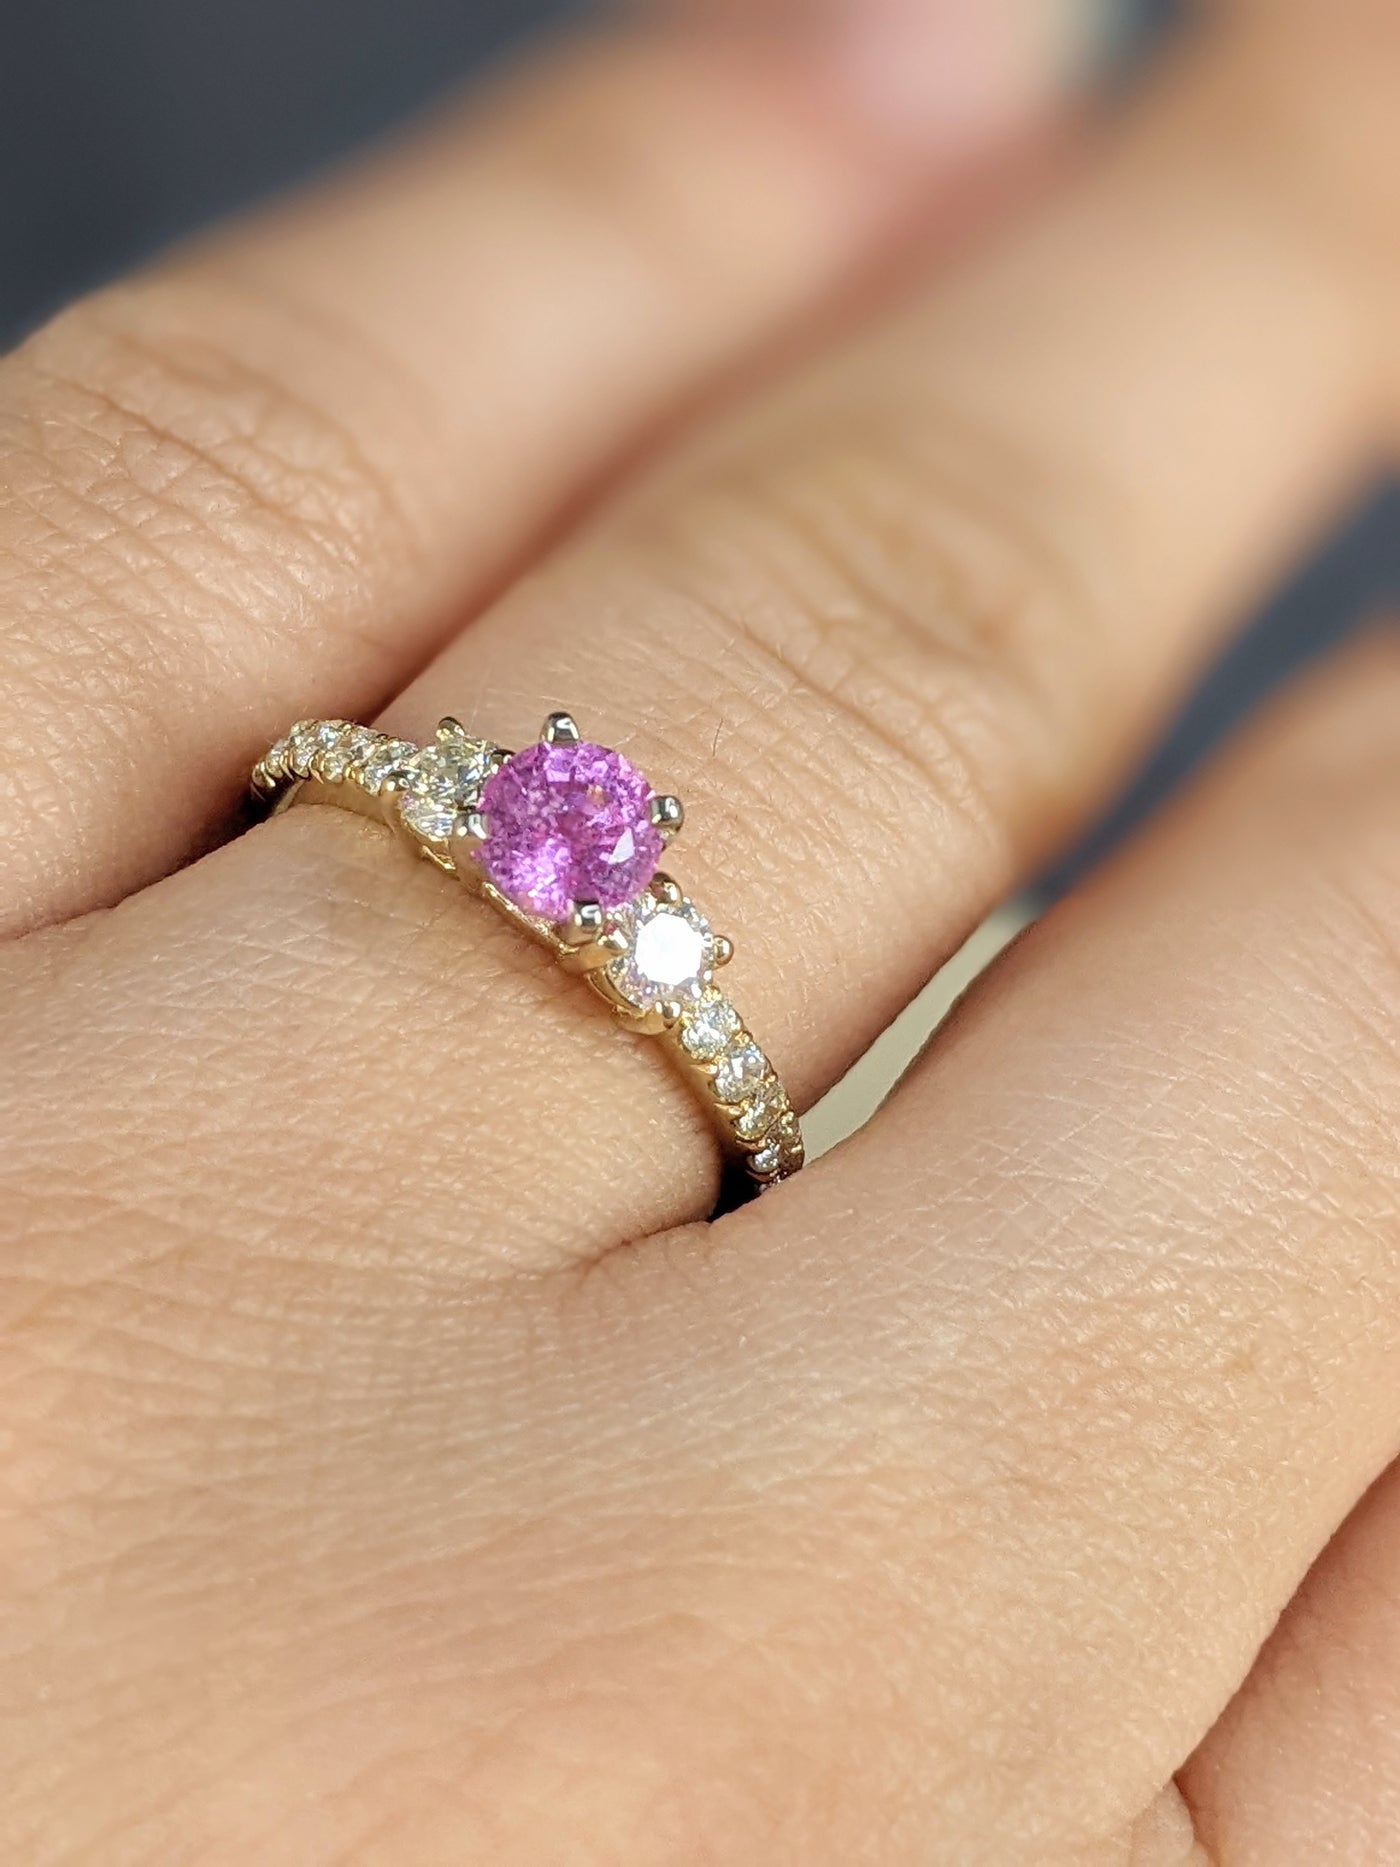 5MM Round Cut Natural Pink Sapphire & 0.58 Ct. Tw. Diamond Ring